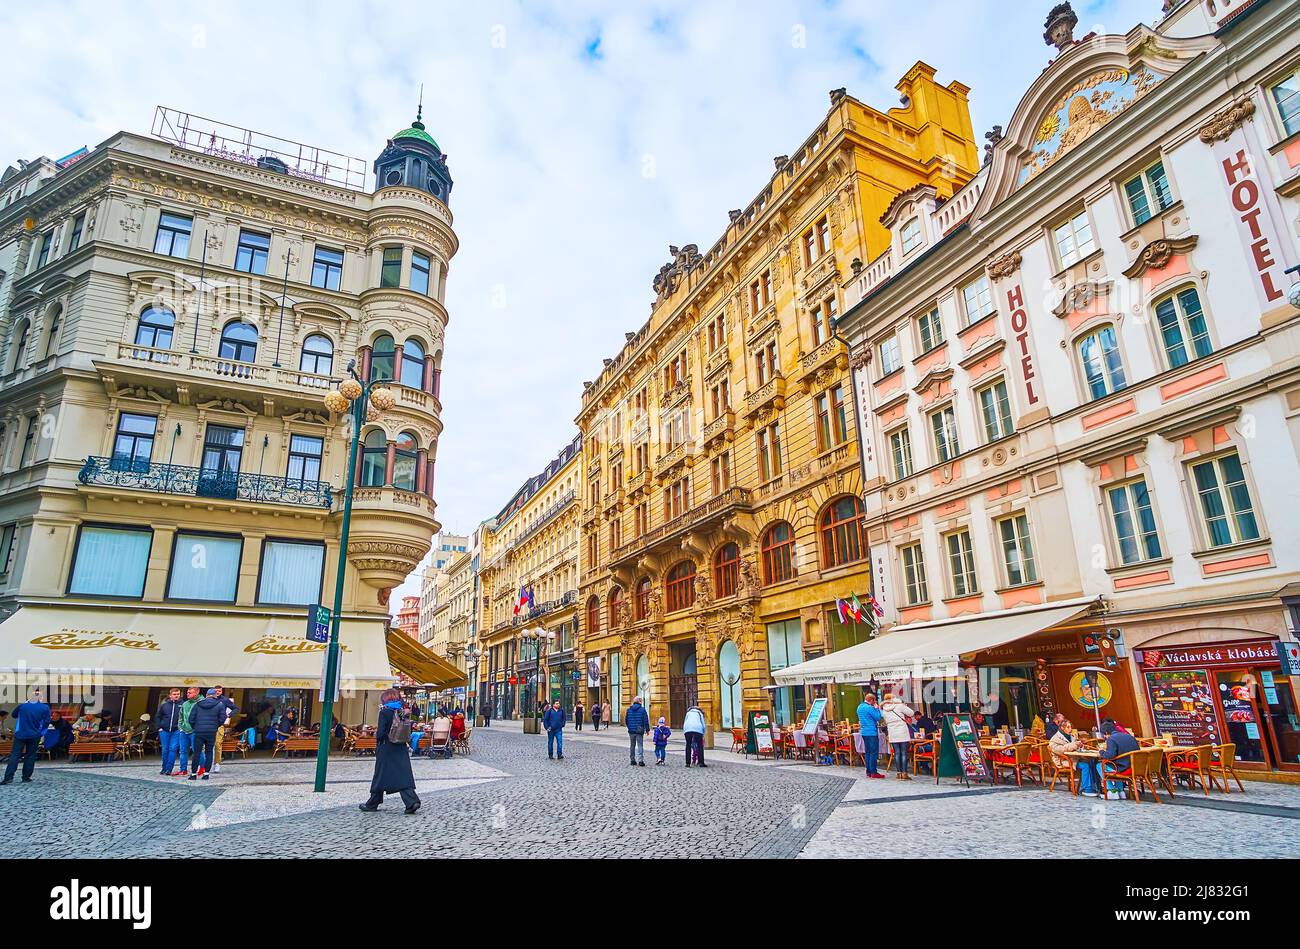 PRAGUE, CZECH REPUBLIC - MARCH 5, 2022: The scenic historic buildings of old Na Prikope (On the Moat) Street with outdoor cafes, hotels and souvenir s Stock Photo